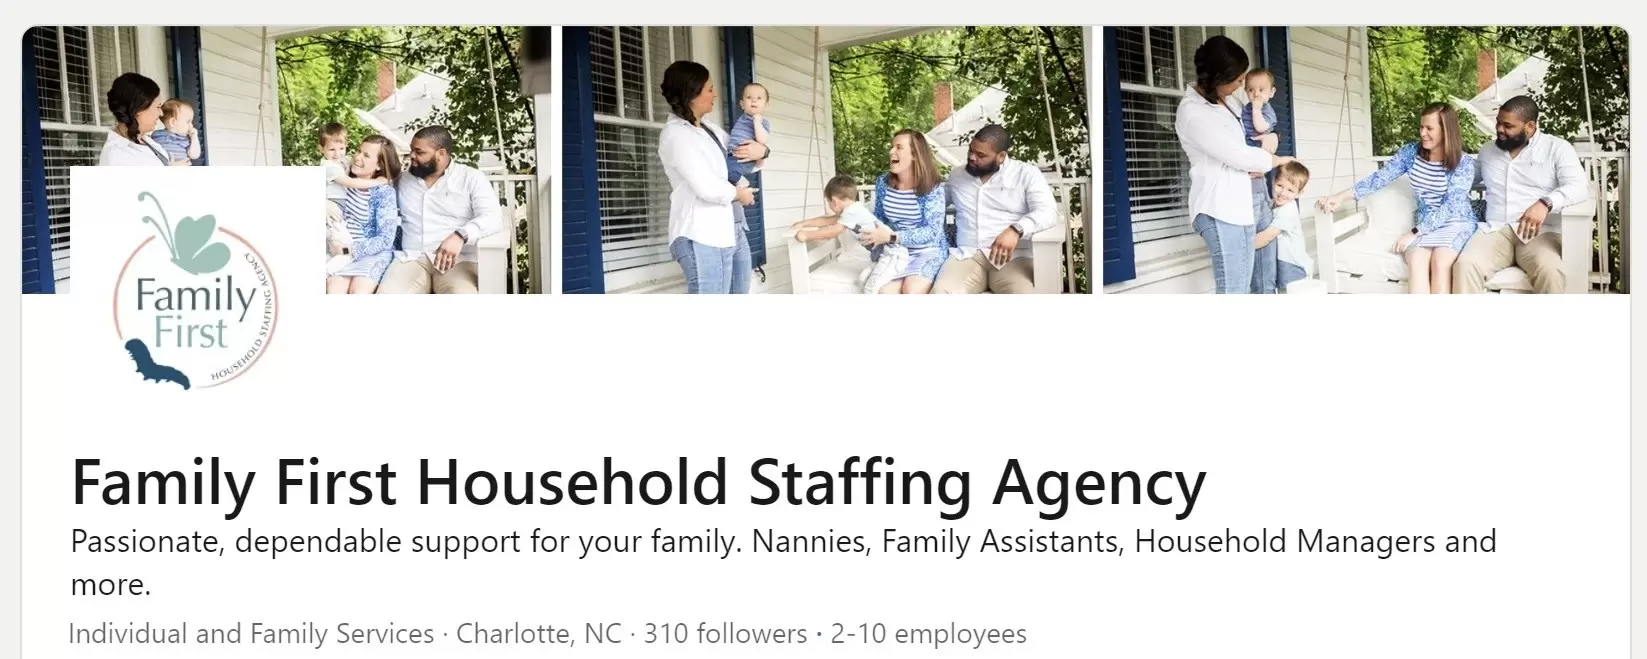 Family First Household Staffing Agency employees